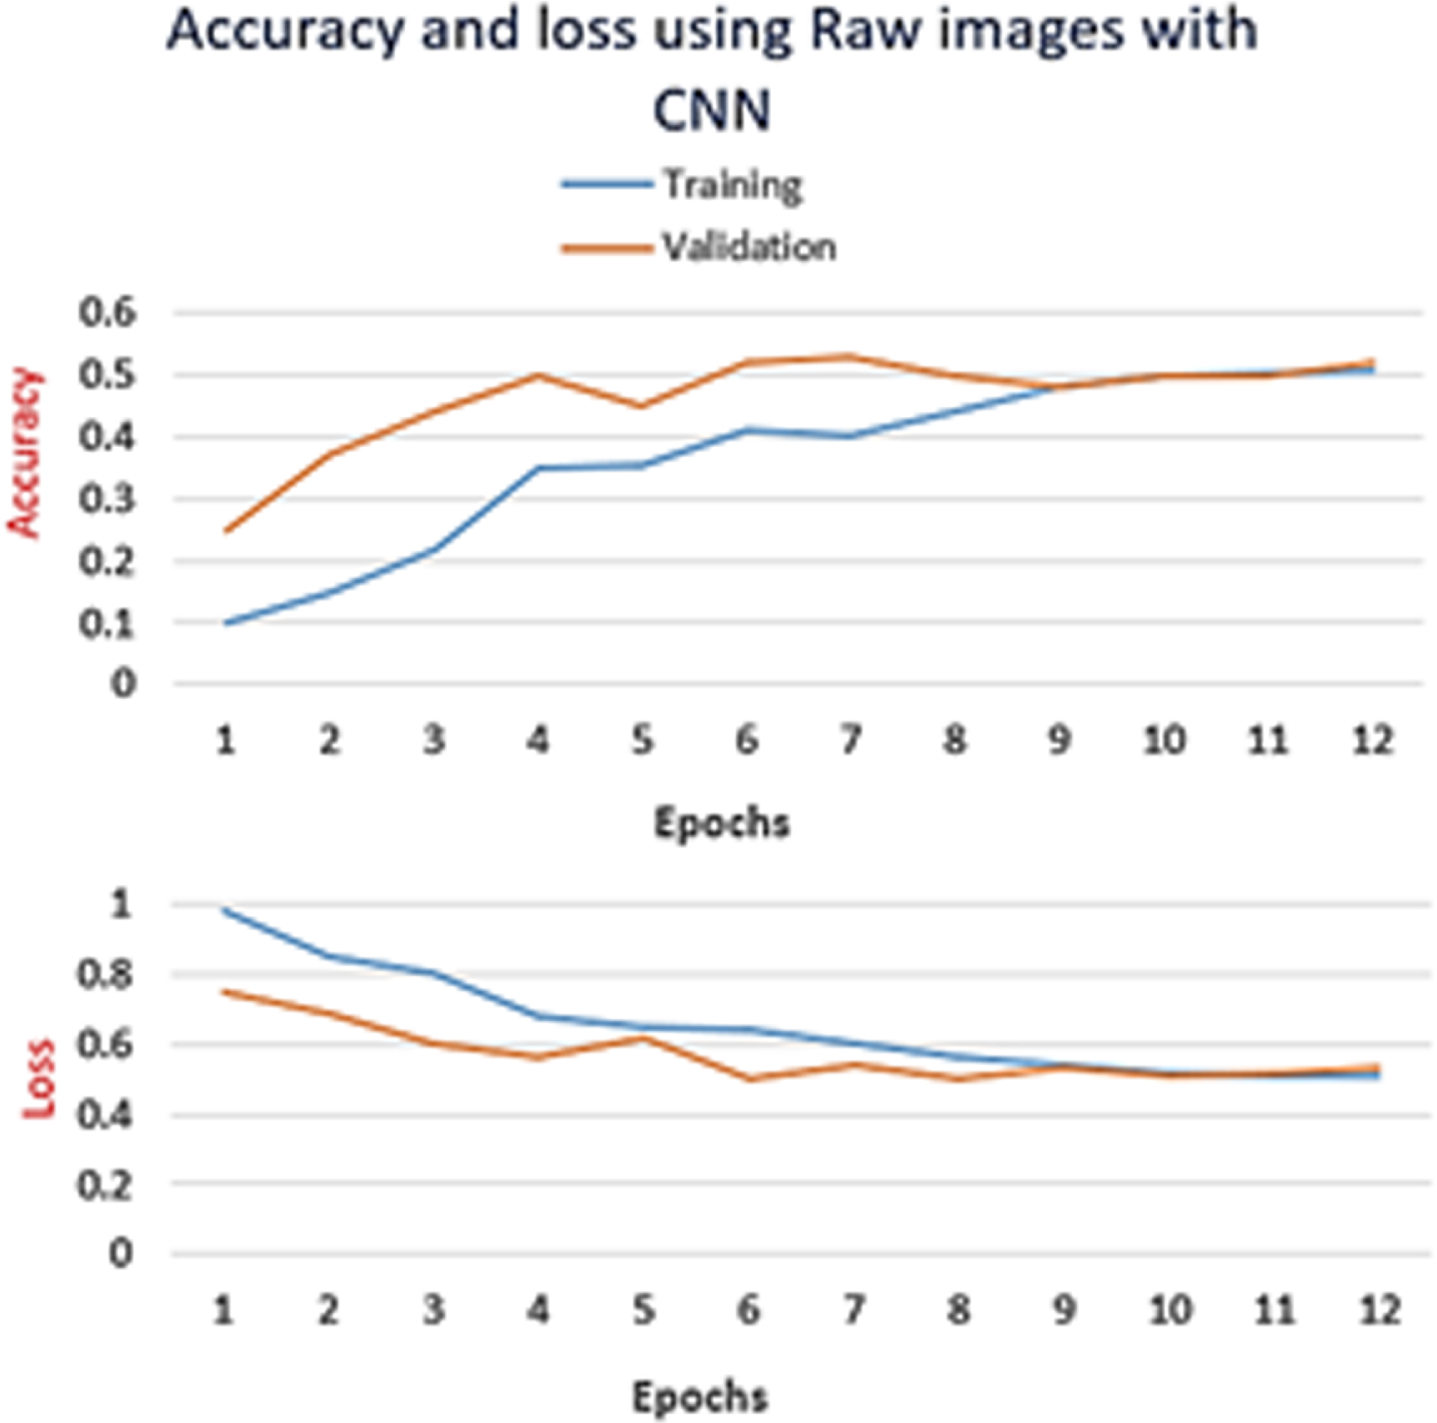 CNN model: Graphs of training accuracy and loss for raw images